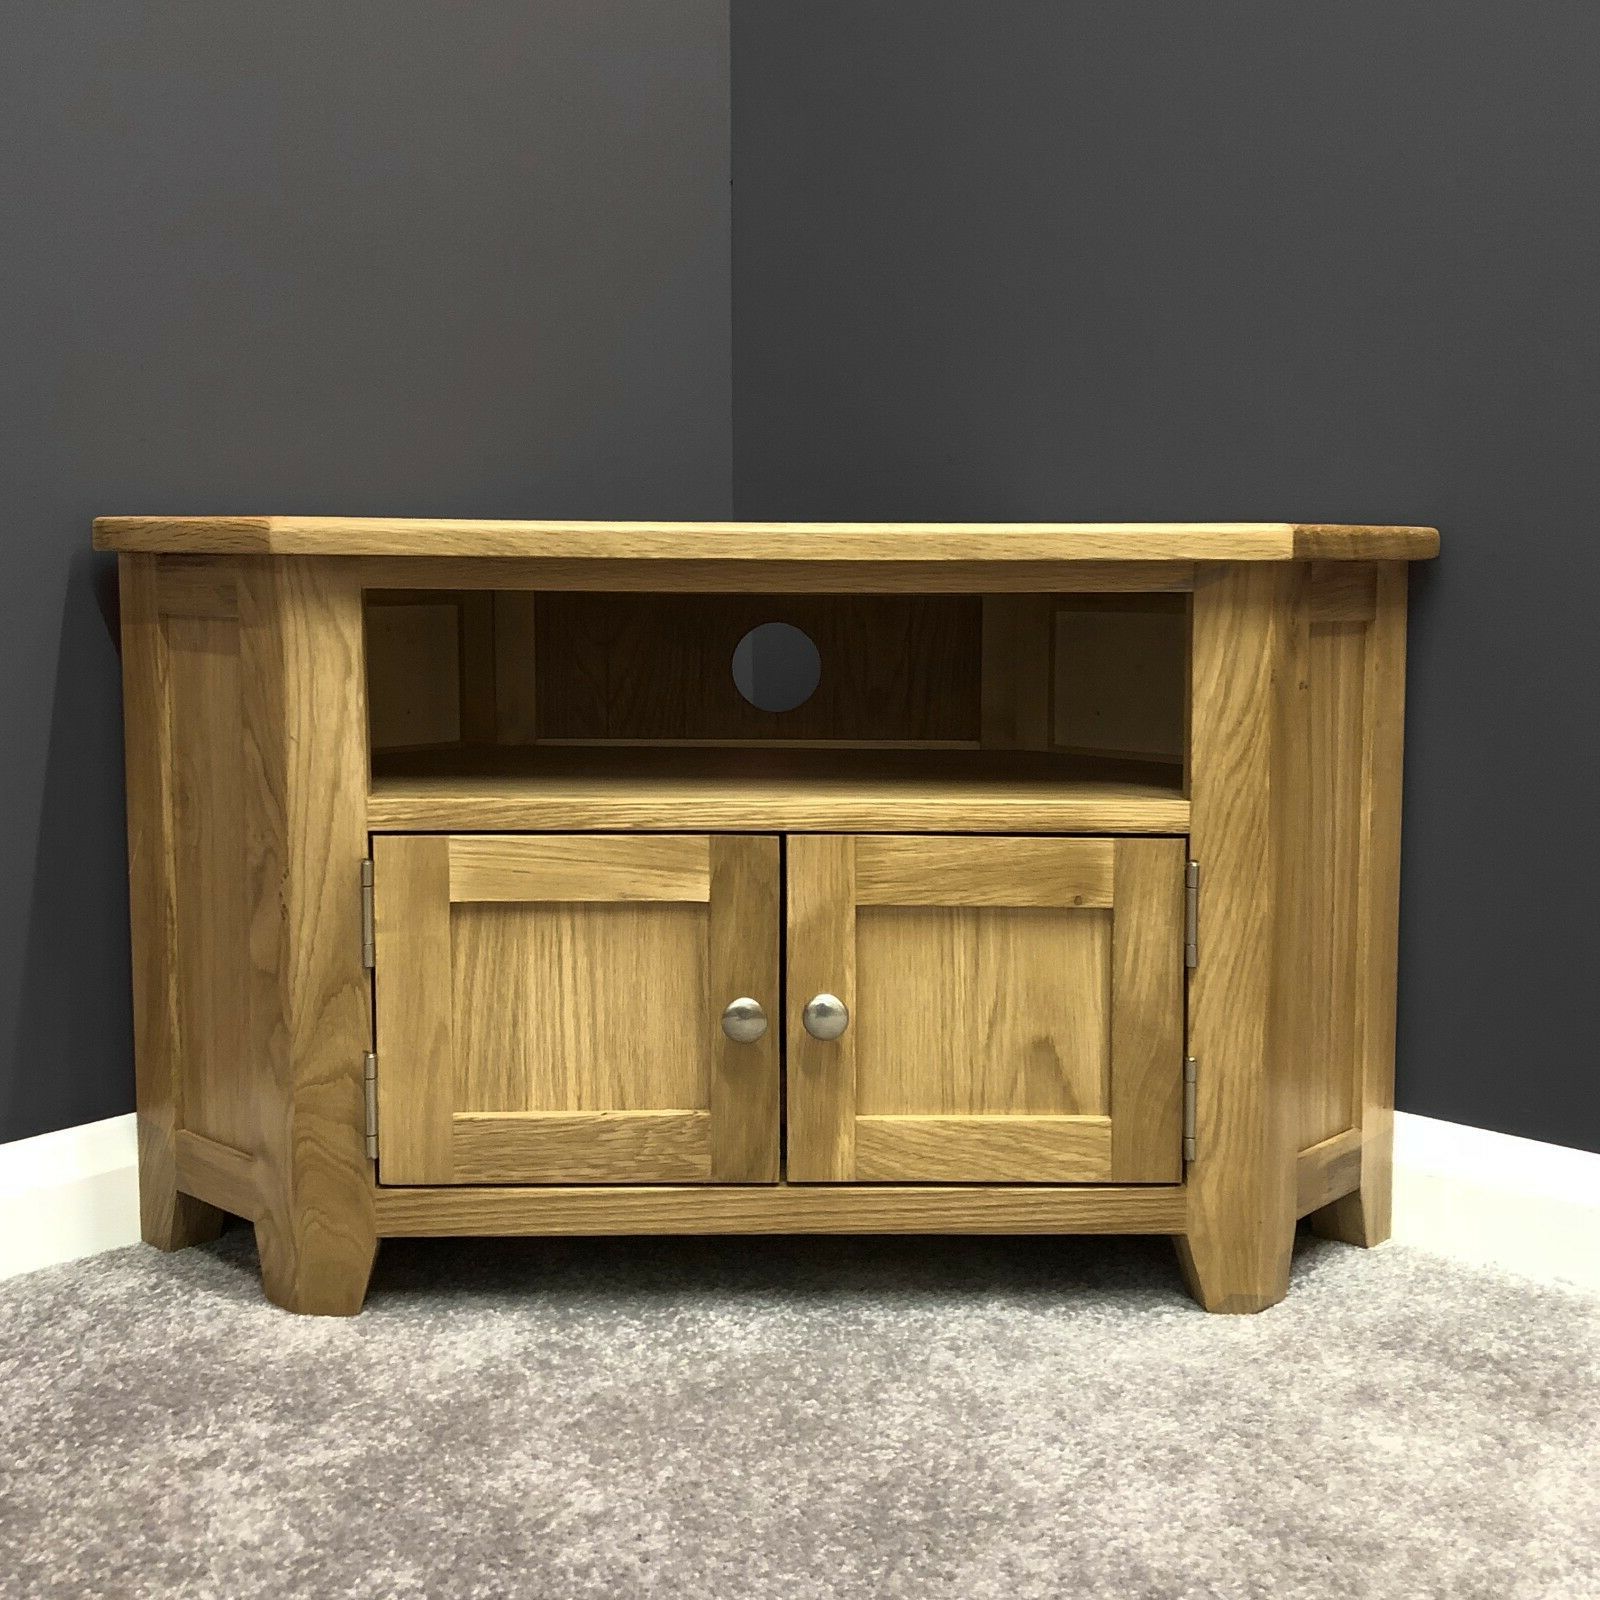 Oak Corner Tv Stand With Doors / Solid Wood Television With Regard To Tribeca Oak Tv Media Stand (Gallery 3 of 20)